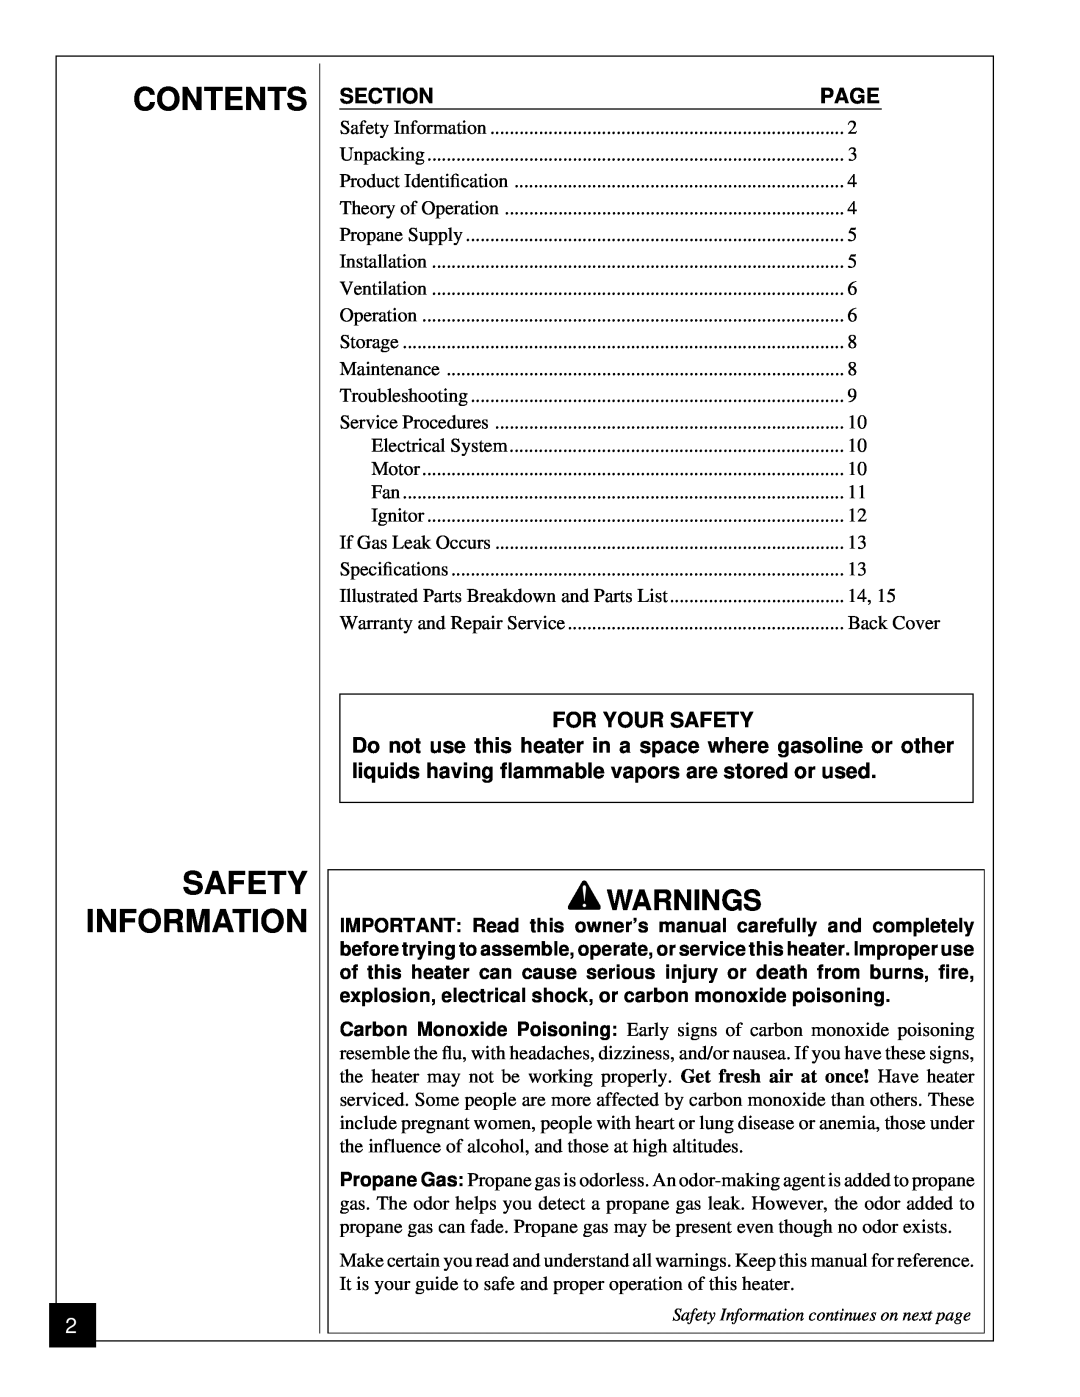 Desa BLP35ES owner manual Contents Safety Information, Warnings, Section, Page, For Your Safety 